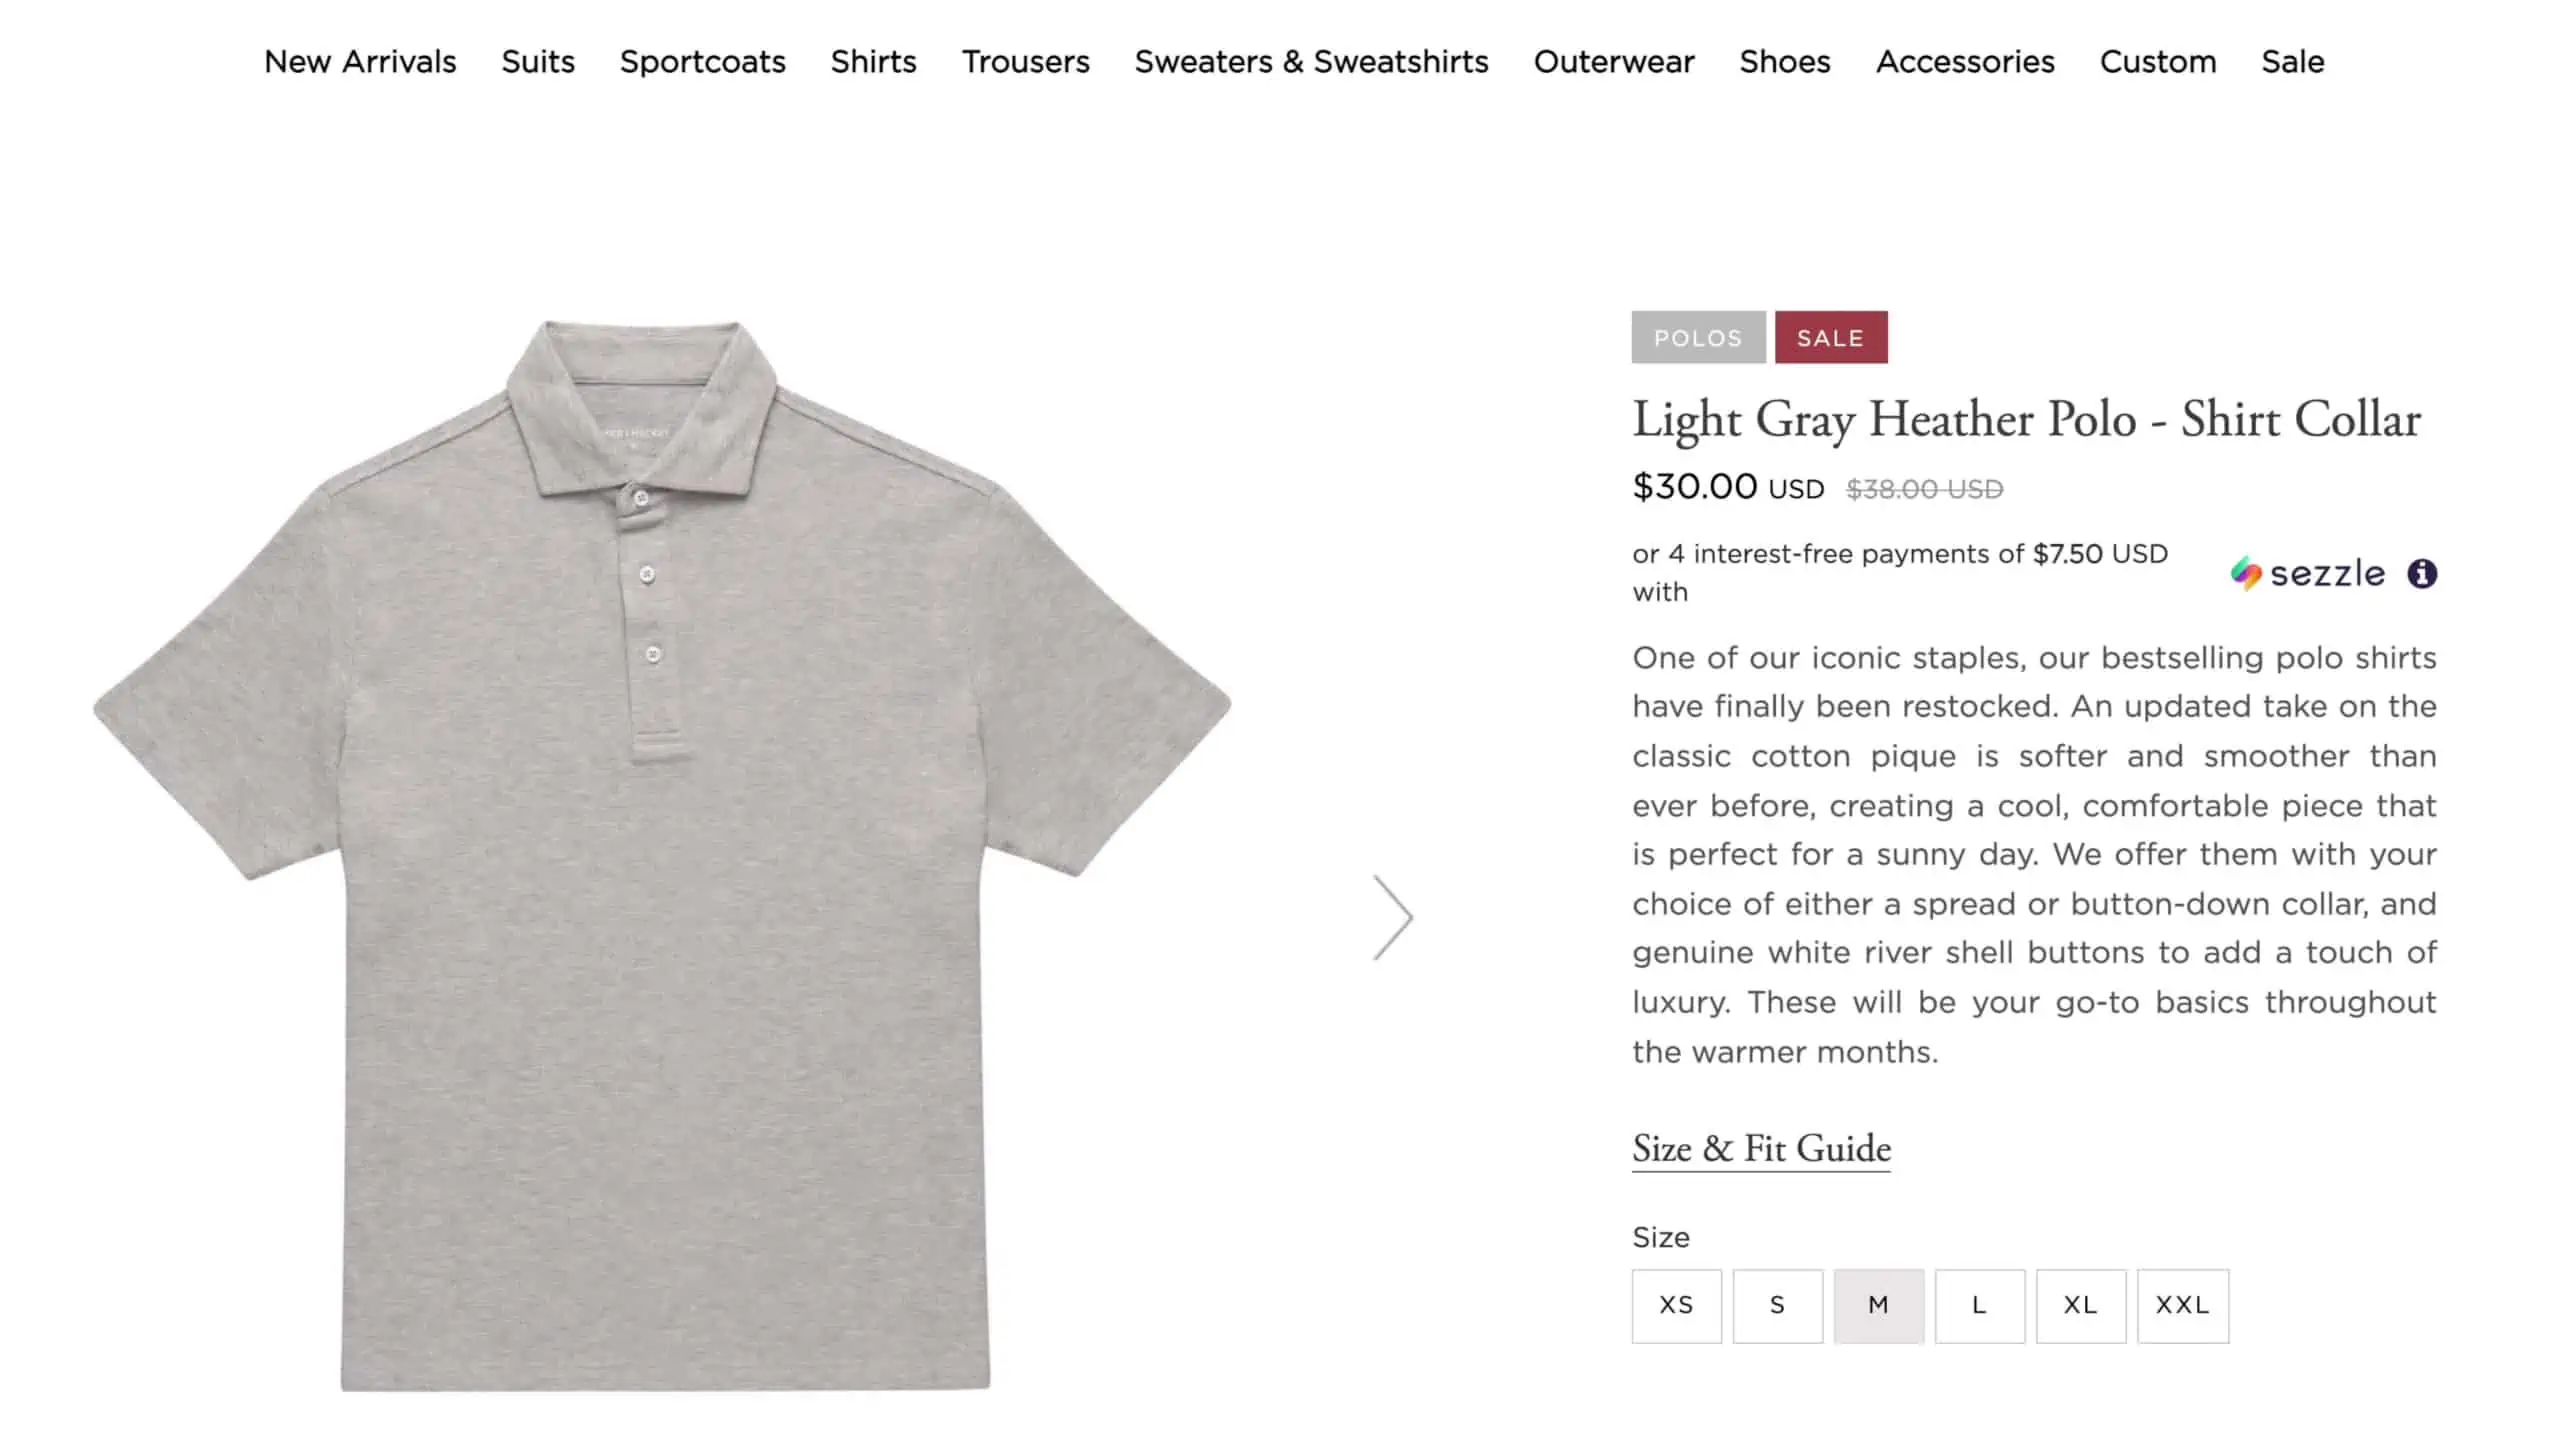 Spier & Mackay’s casual shirts have sizes of small, medium, large, etc.